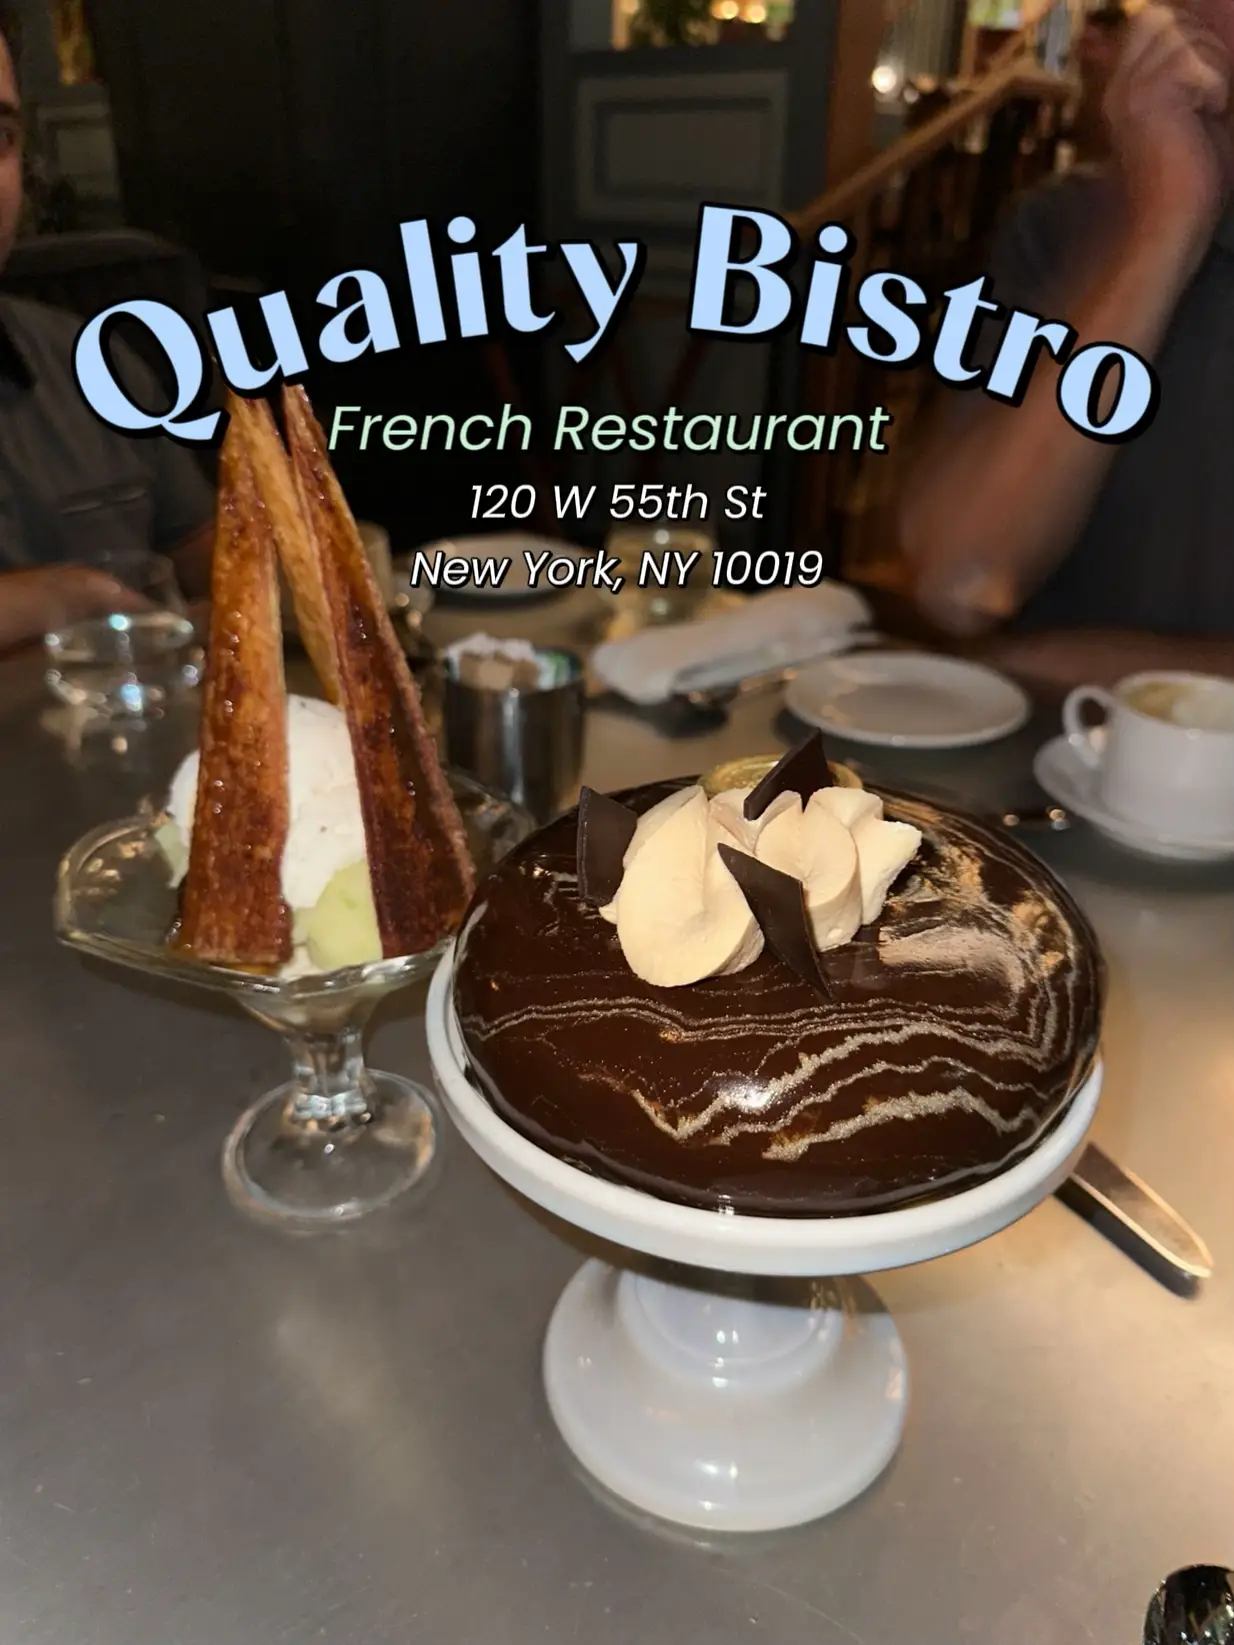 Best French Restaurant in NYC